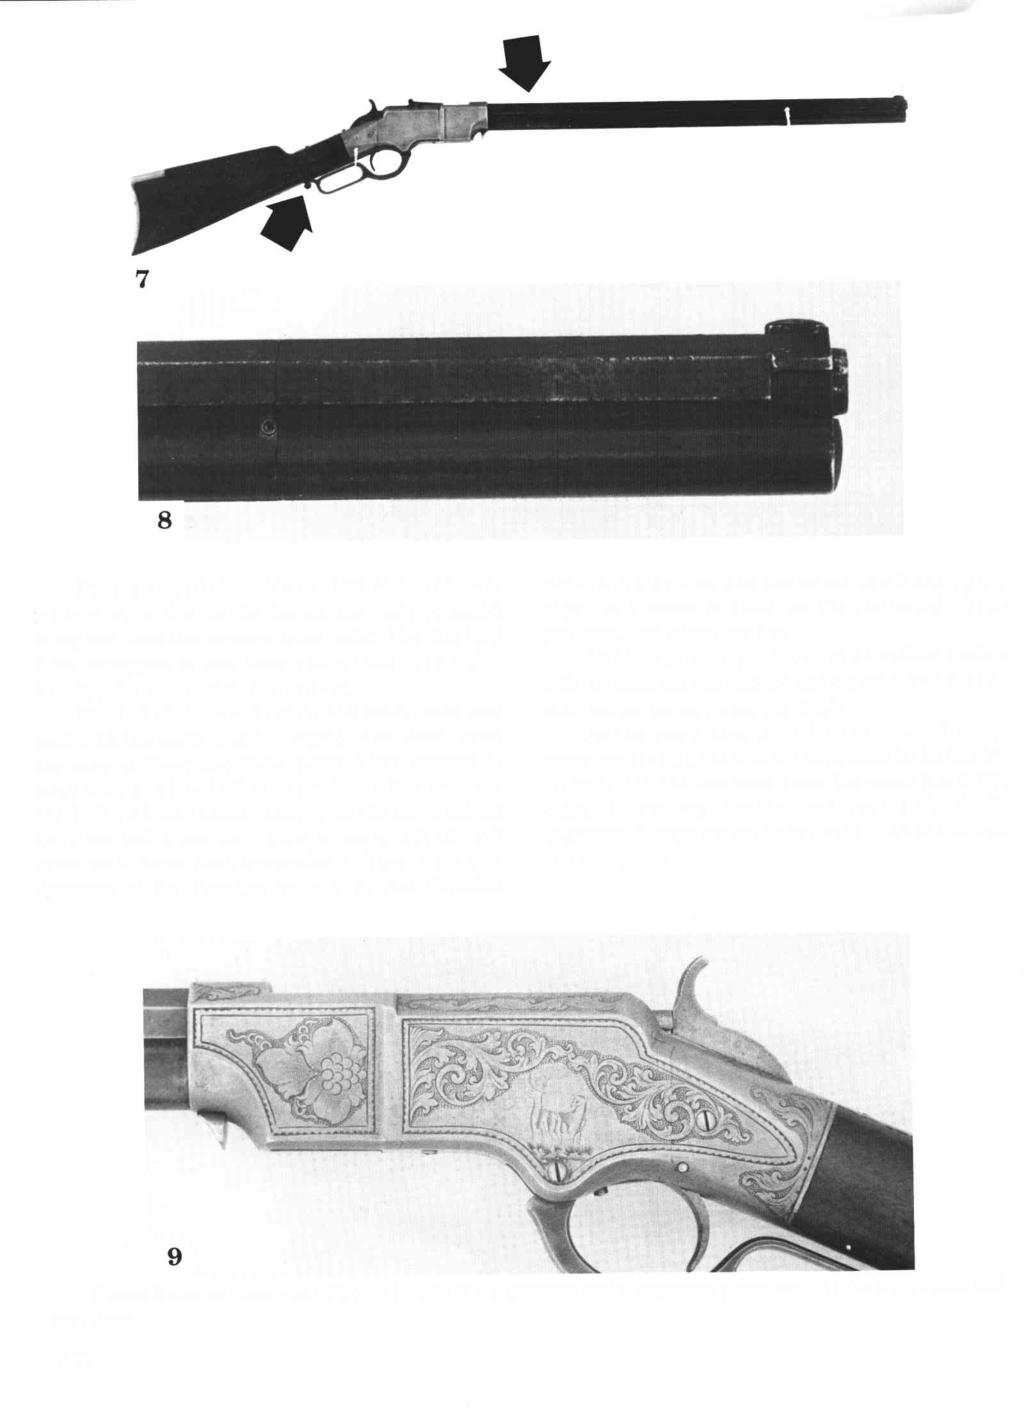 Photos 7 and 8 show rifle no. 469. Notice there is no rear sight slot on the barrel, the early rounded buttplate, and the strange front sight.